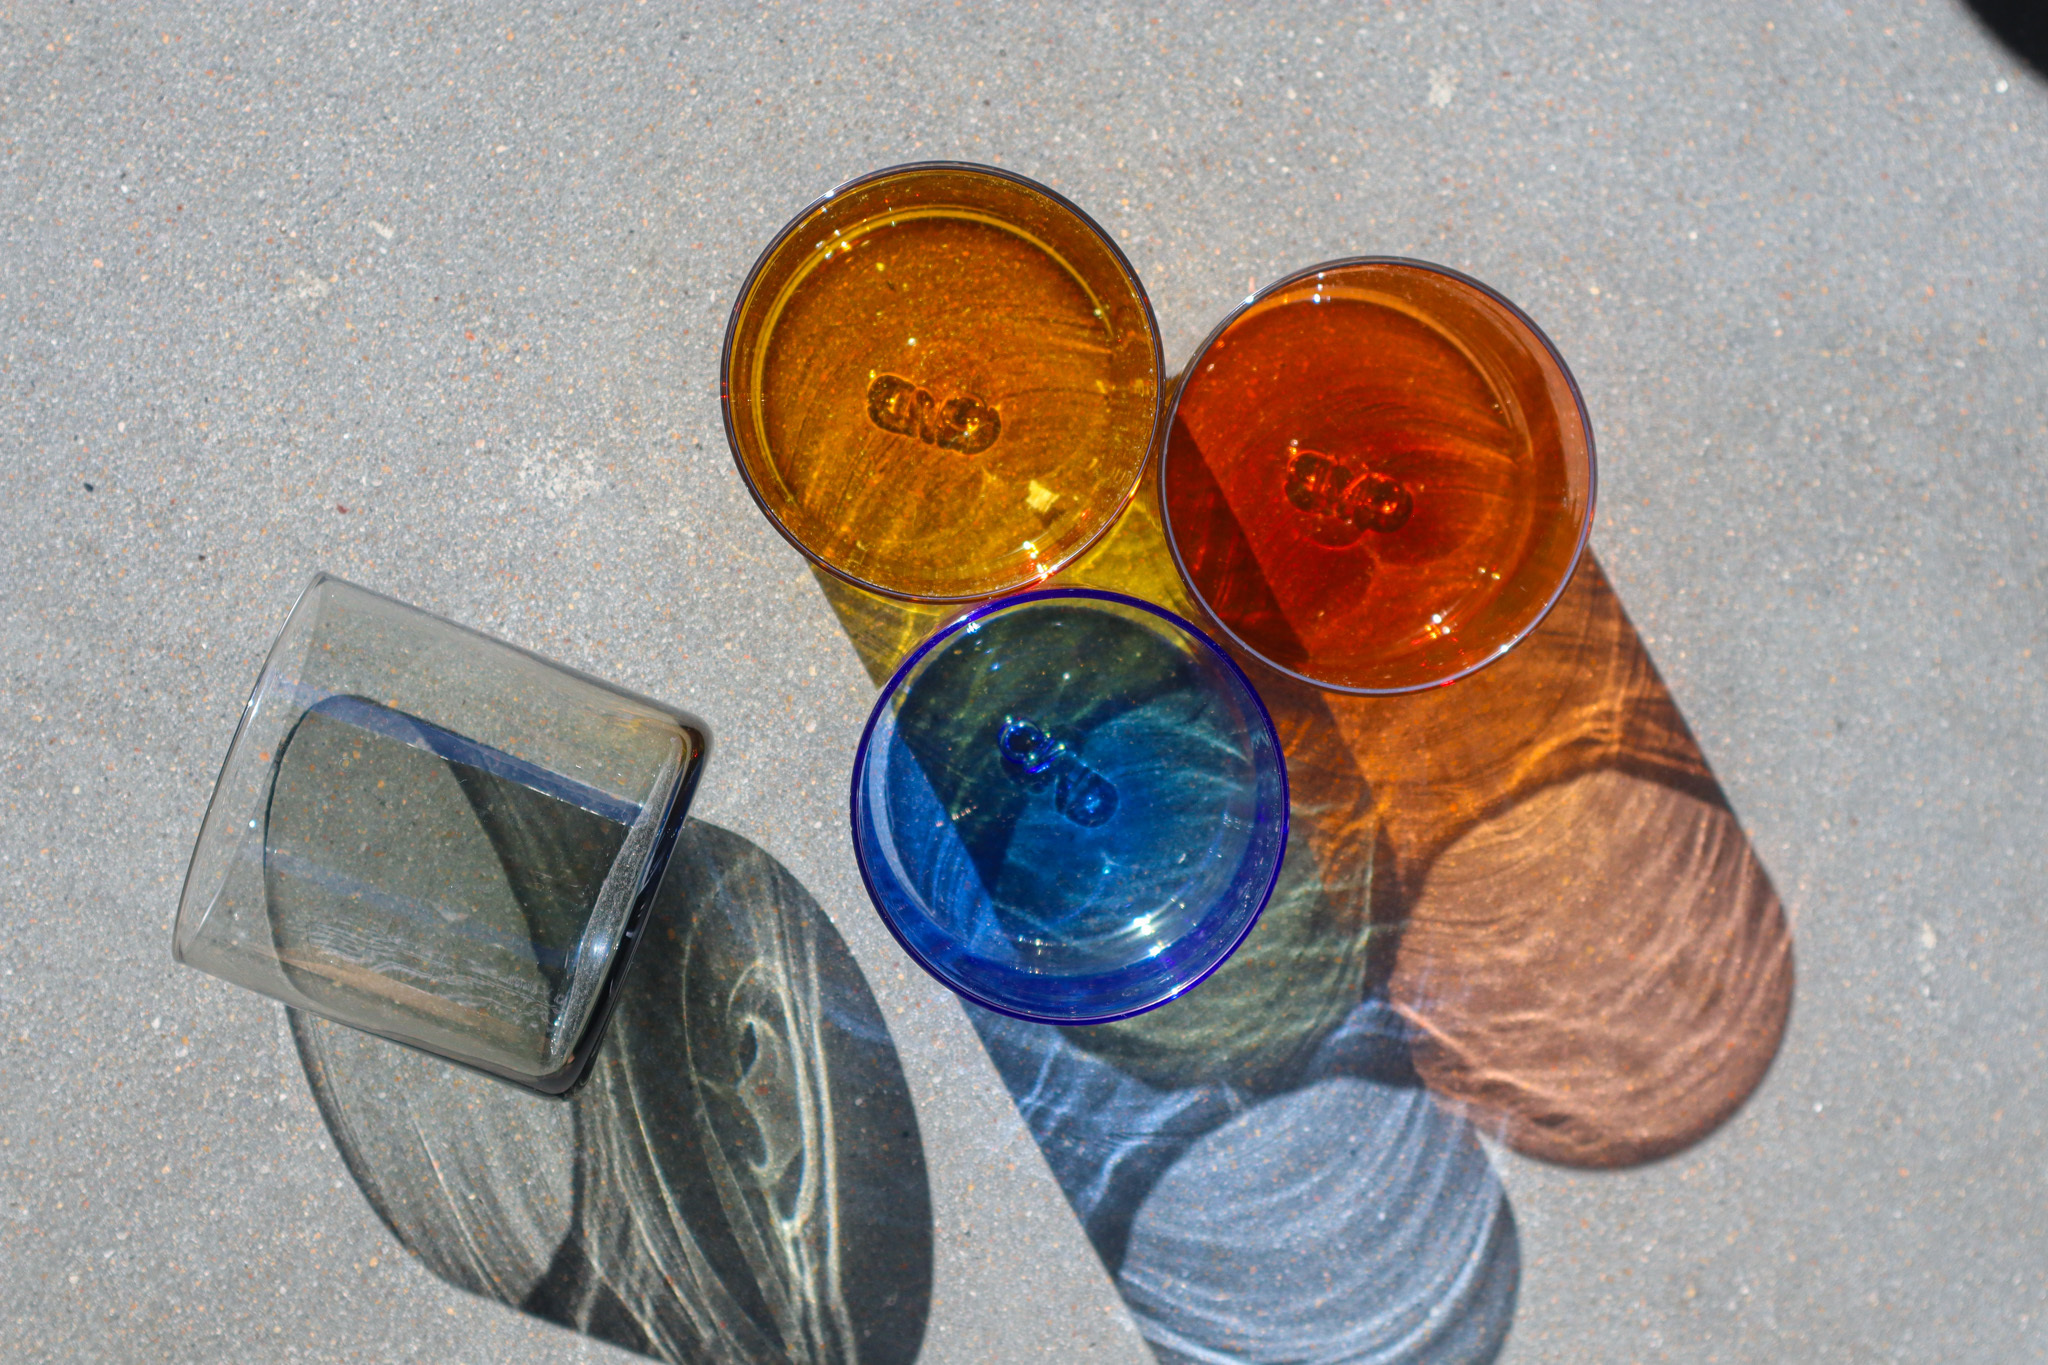 Four glass cups sit on cement. Three are grouped in a triangle while one lays on its side. The group of three are orange, red and blue colors, and the single glass is black.